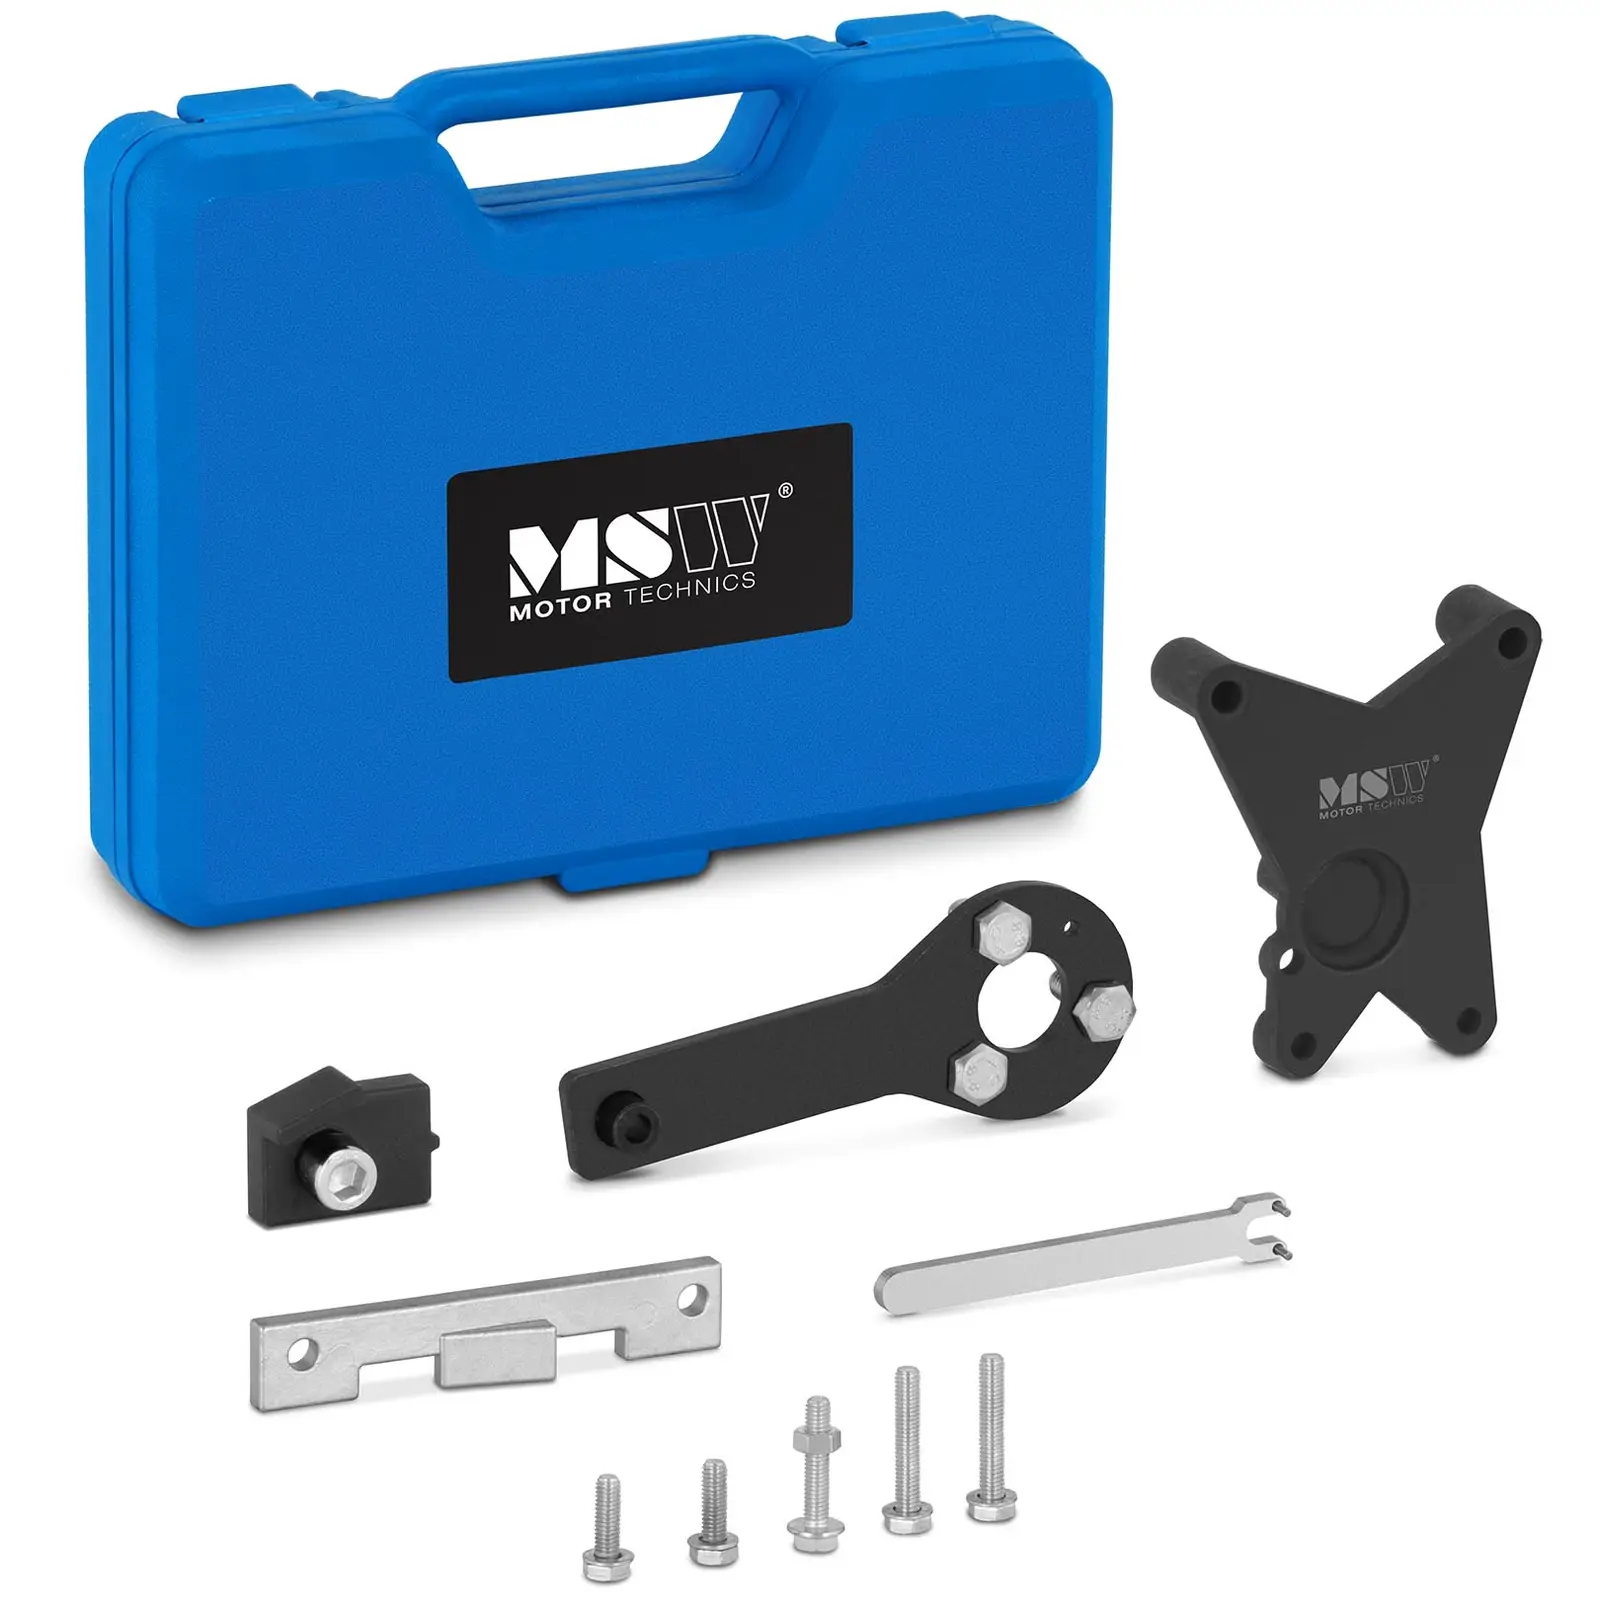 Timing Chain Tool Set - for Fiat 1.2 8V and 1.4 16V